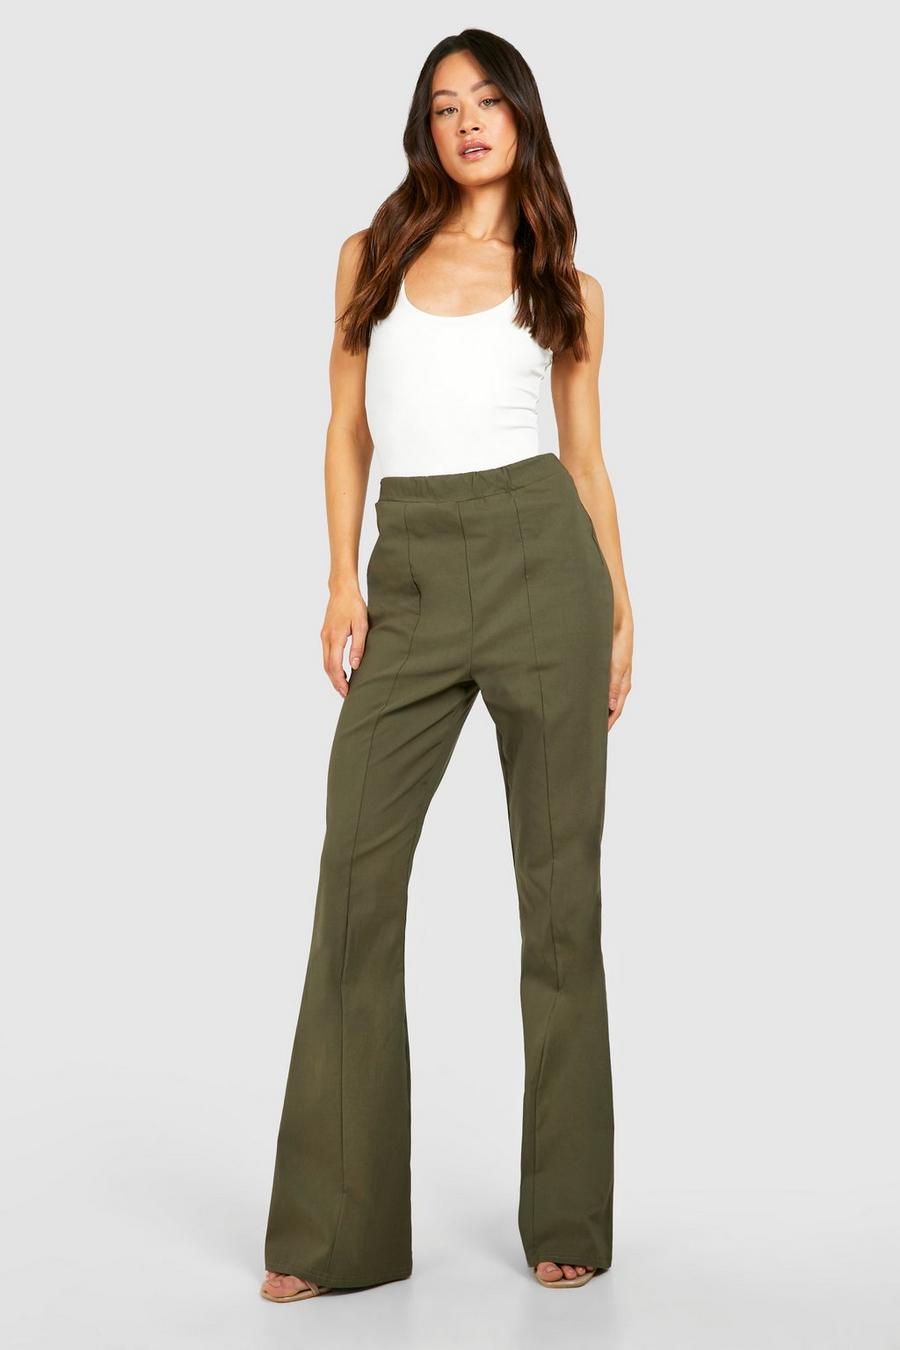 Khaki Tall Bengaline Stretch Fit And Flare Pants image number 1